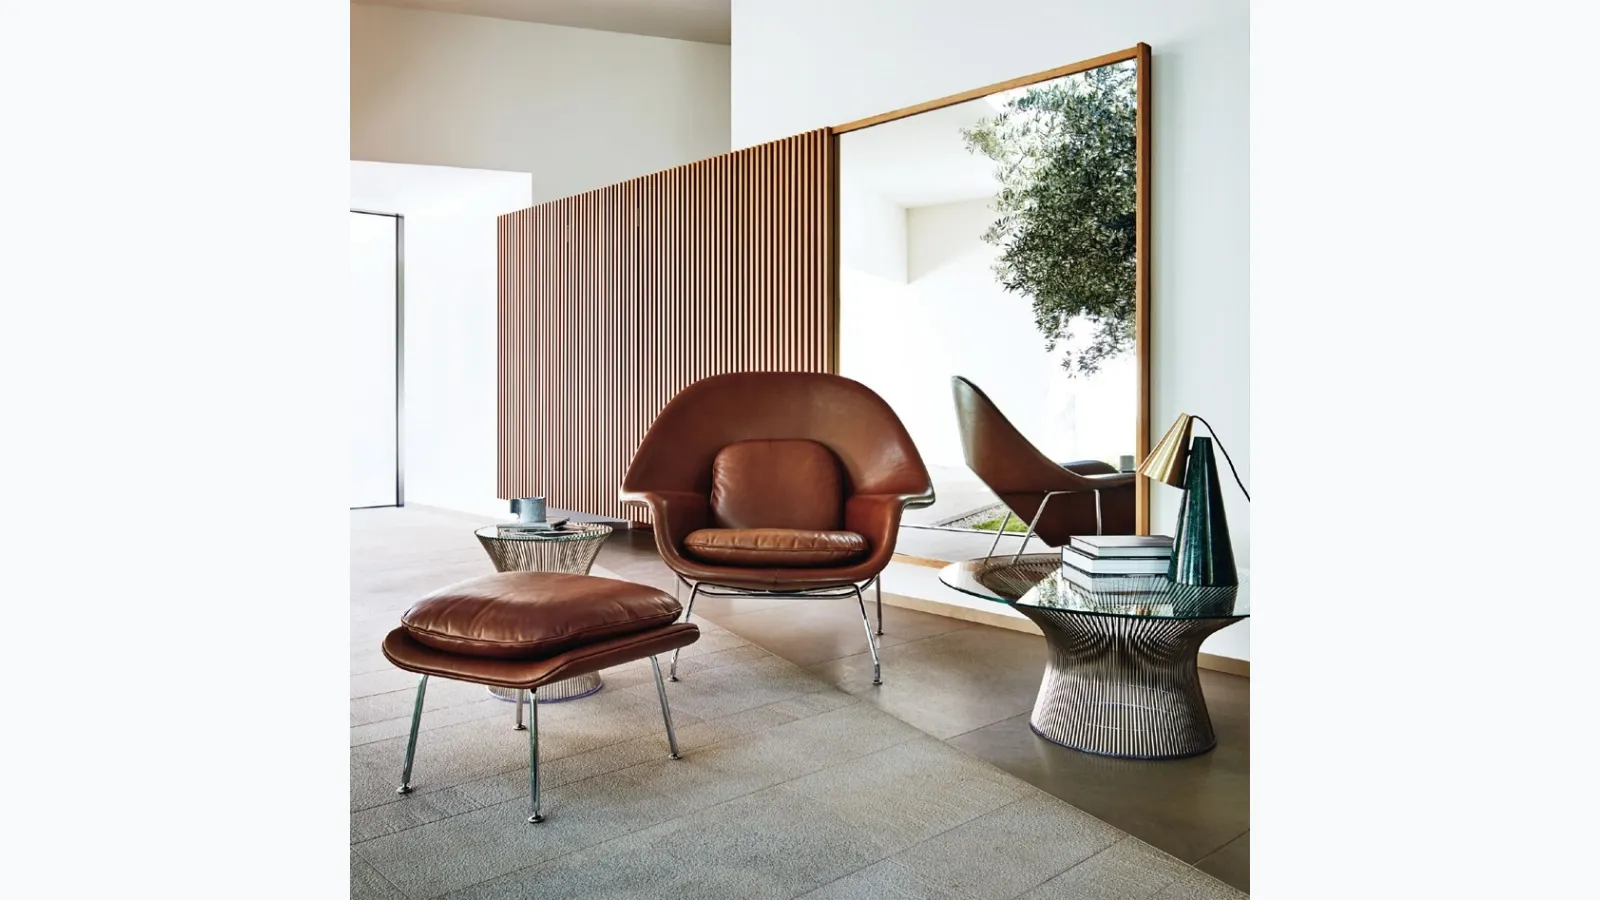 Poltroncina in pelle Saarinen Womb Chair and Settee Relax di Knoll